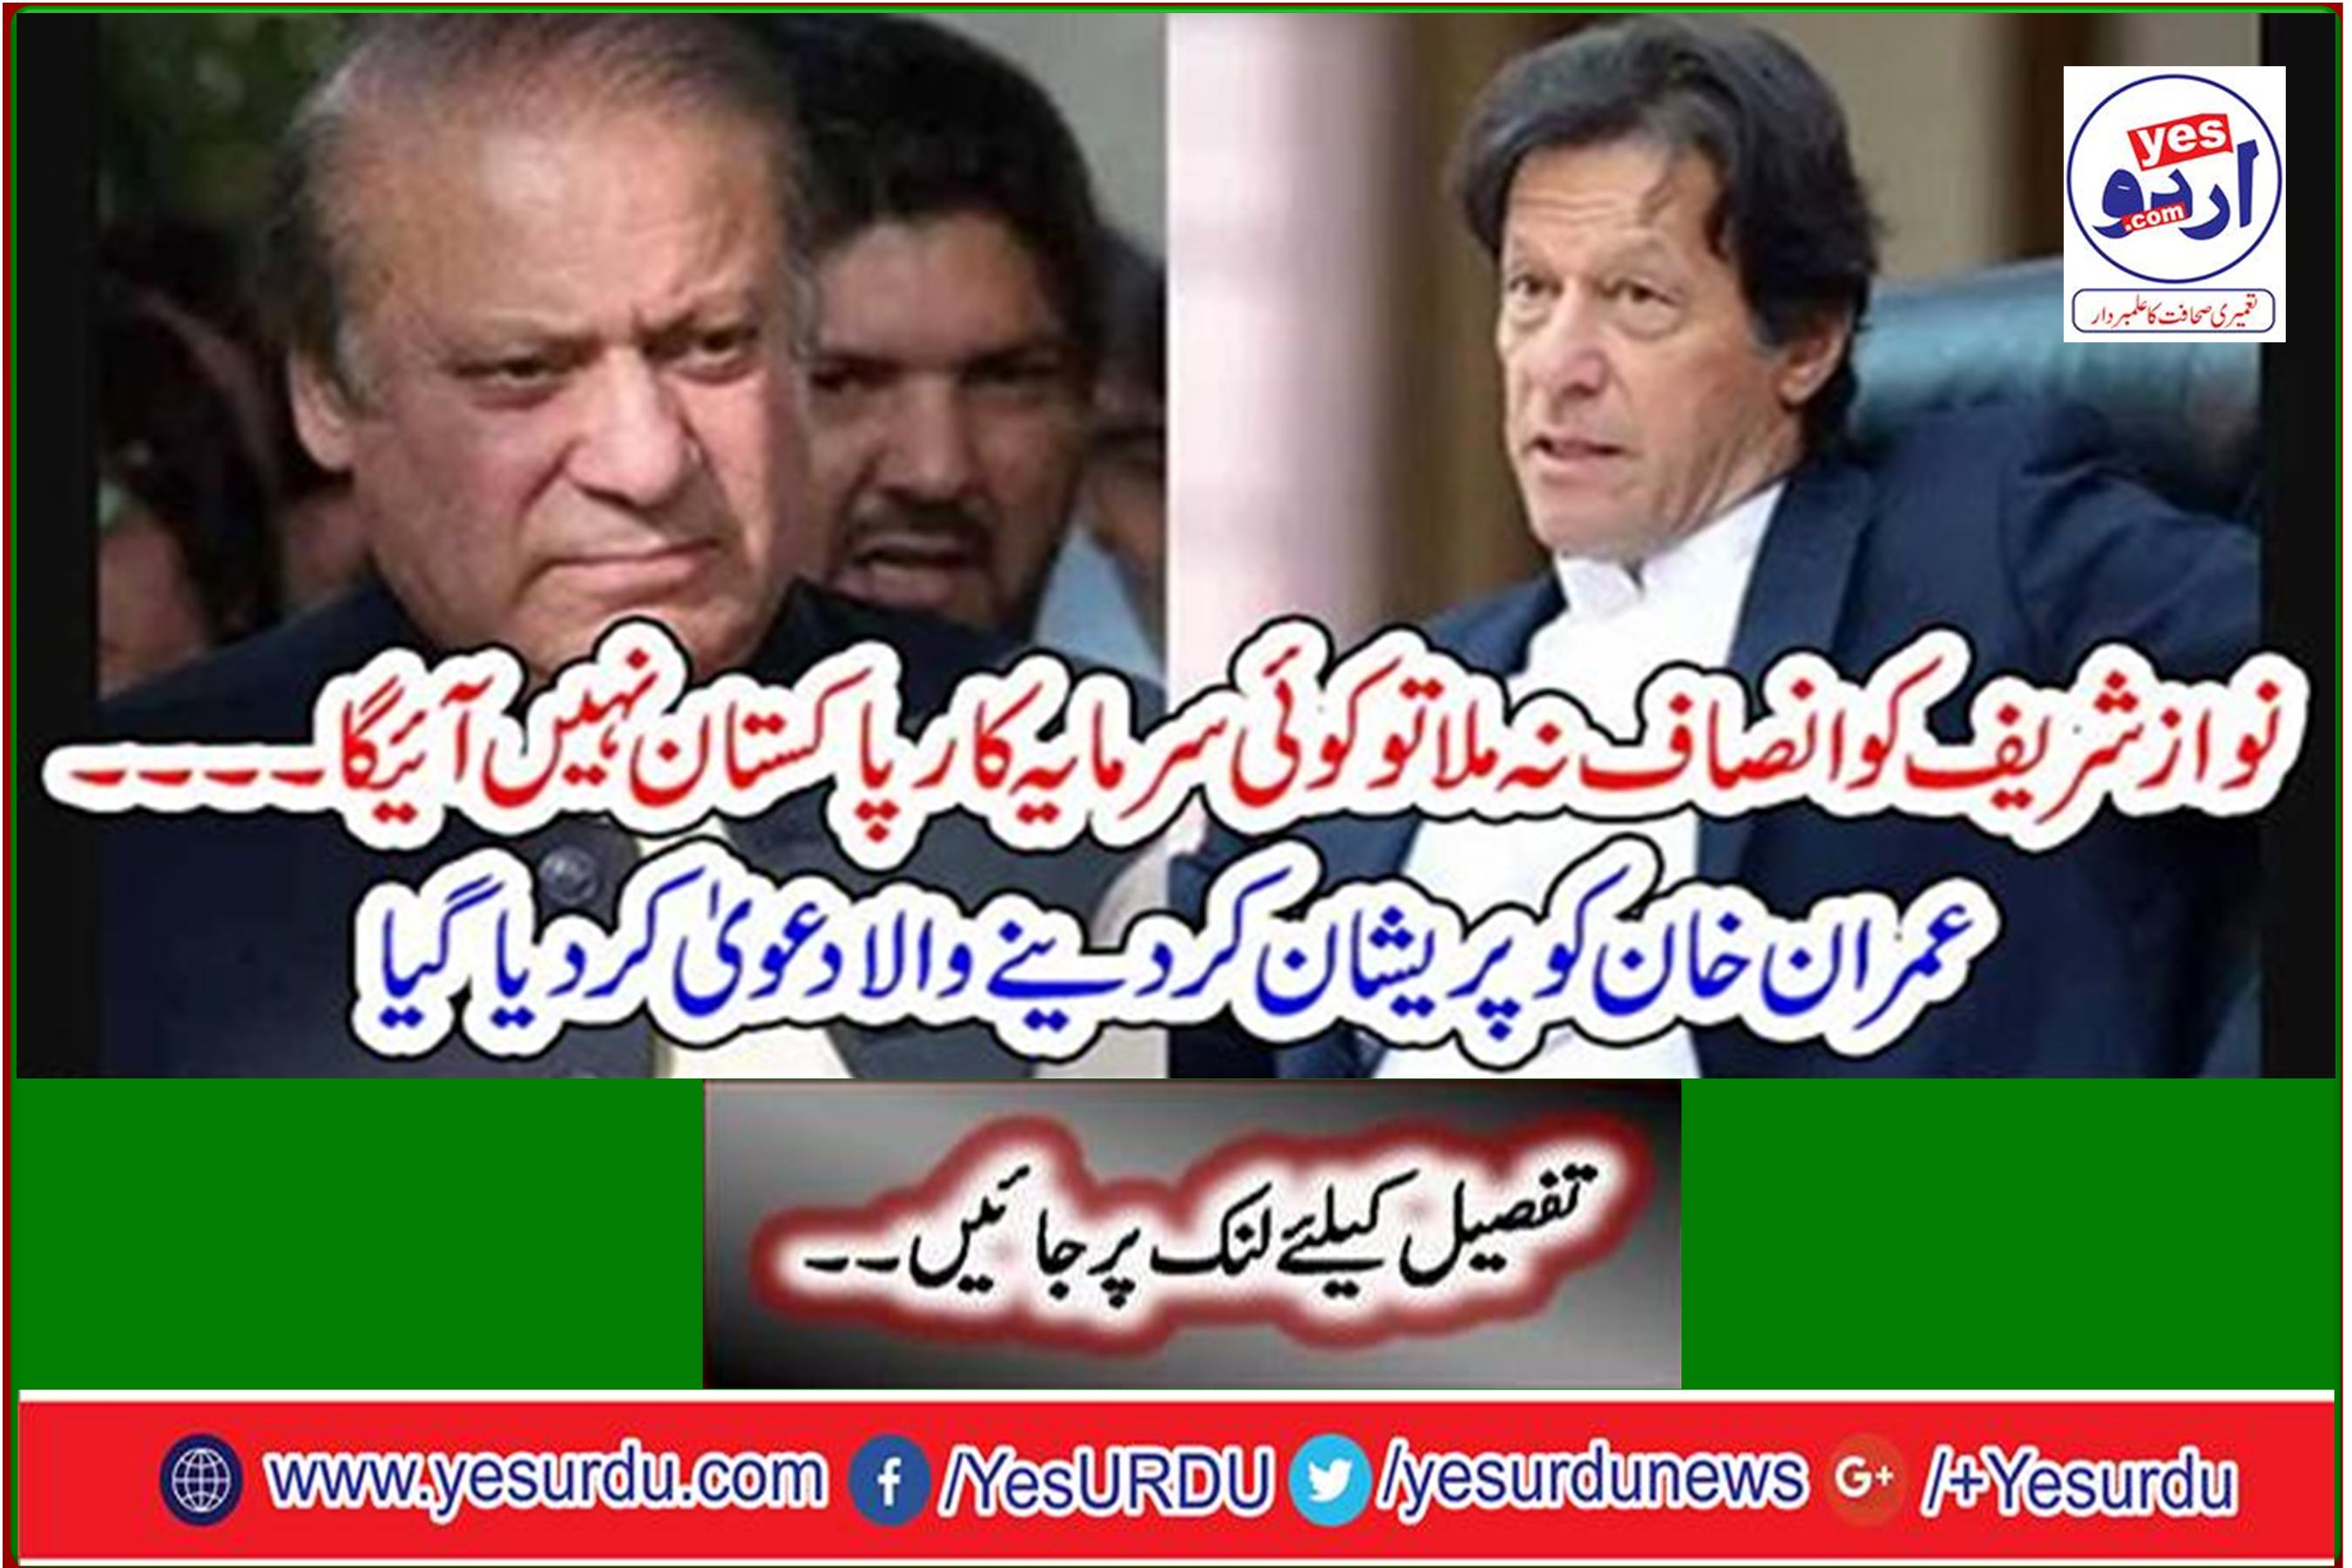 If Nawaz Sharif does not get justice, no investor will come to Pakistan ... Imran Khan claims to have been disturbed